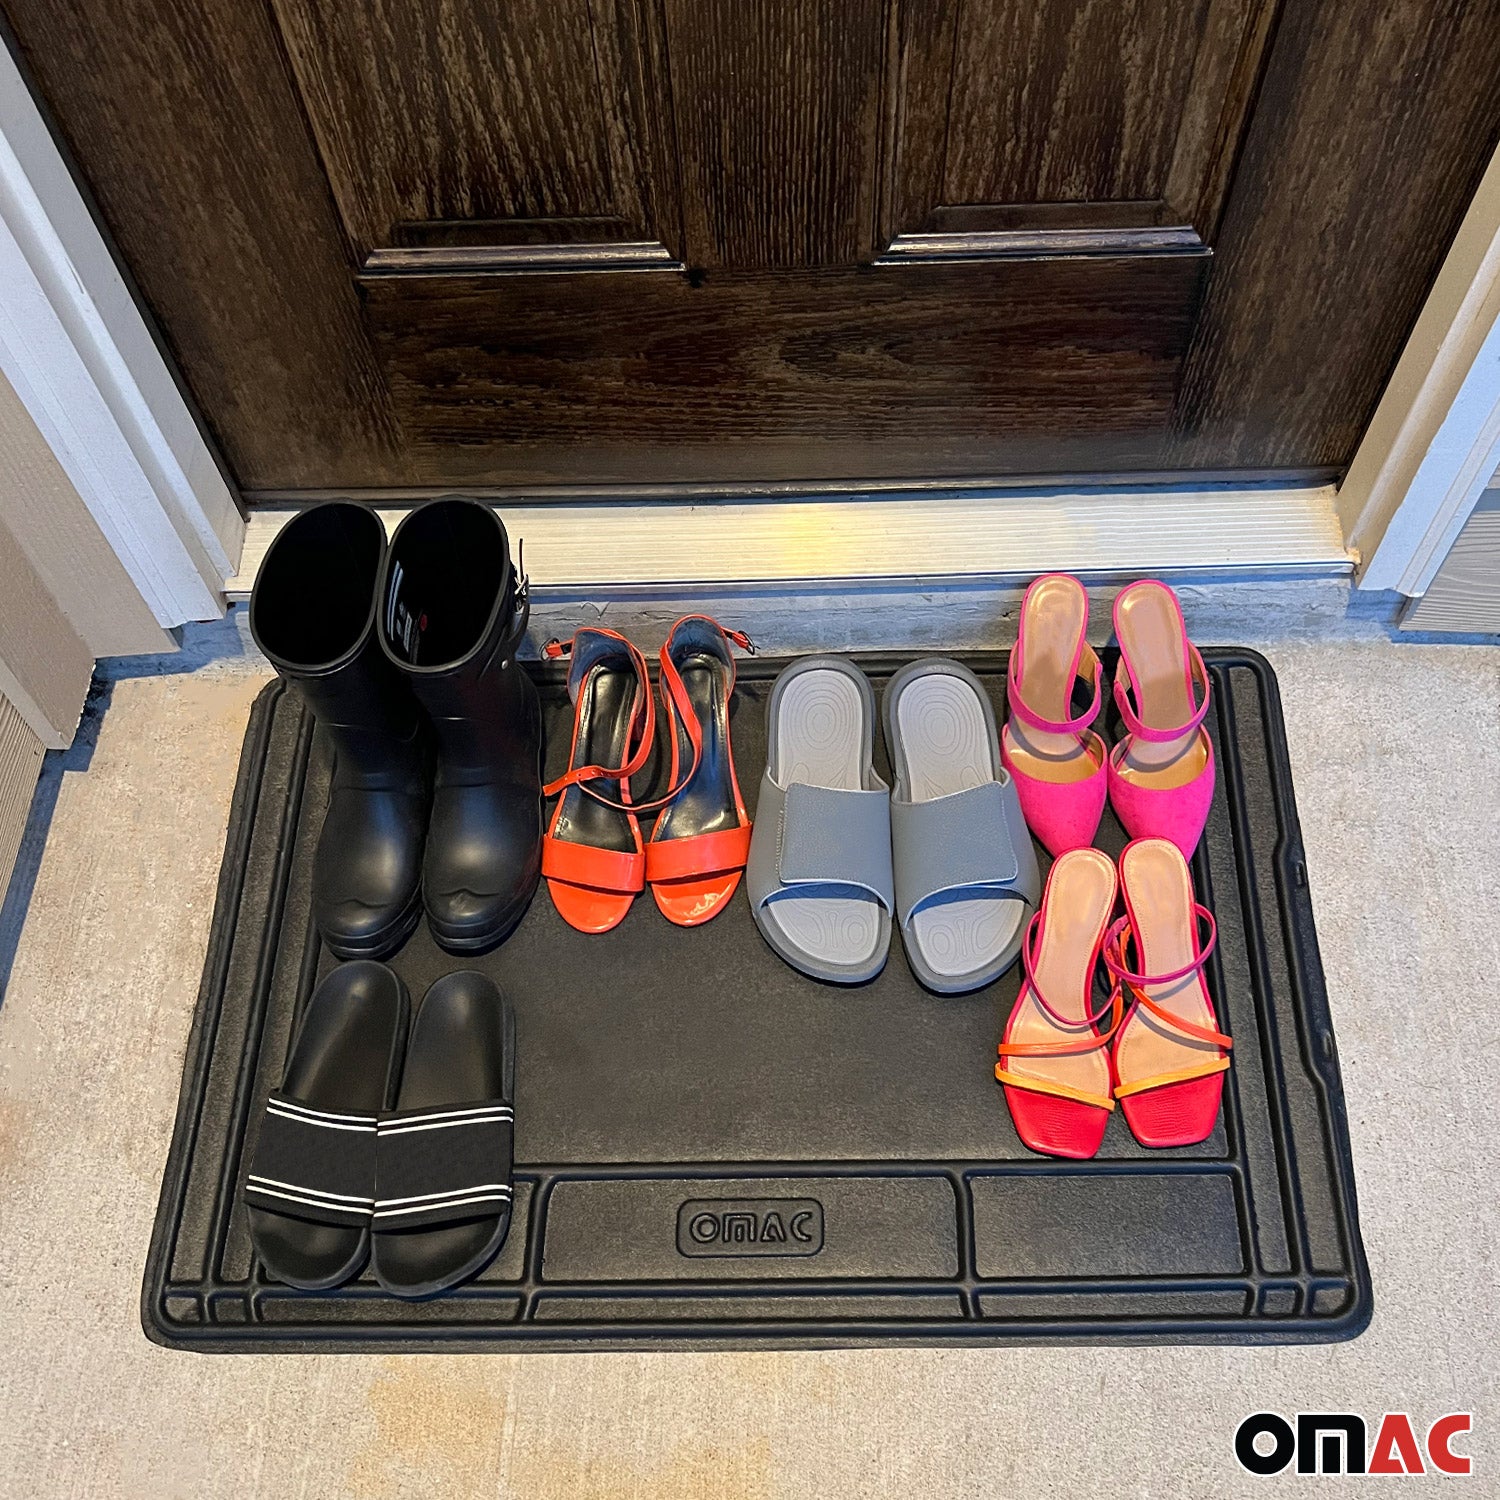 Omac Black Under The Sink Mat Kitchen Cabinet Mat Trimmable Waterproof Raised Edge Cabinet Liner Protector for Kitchen and Bath